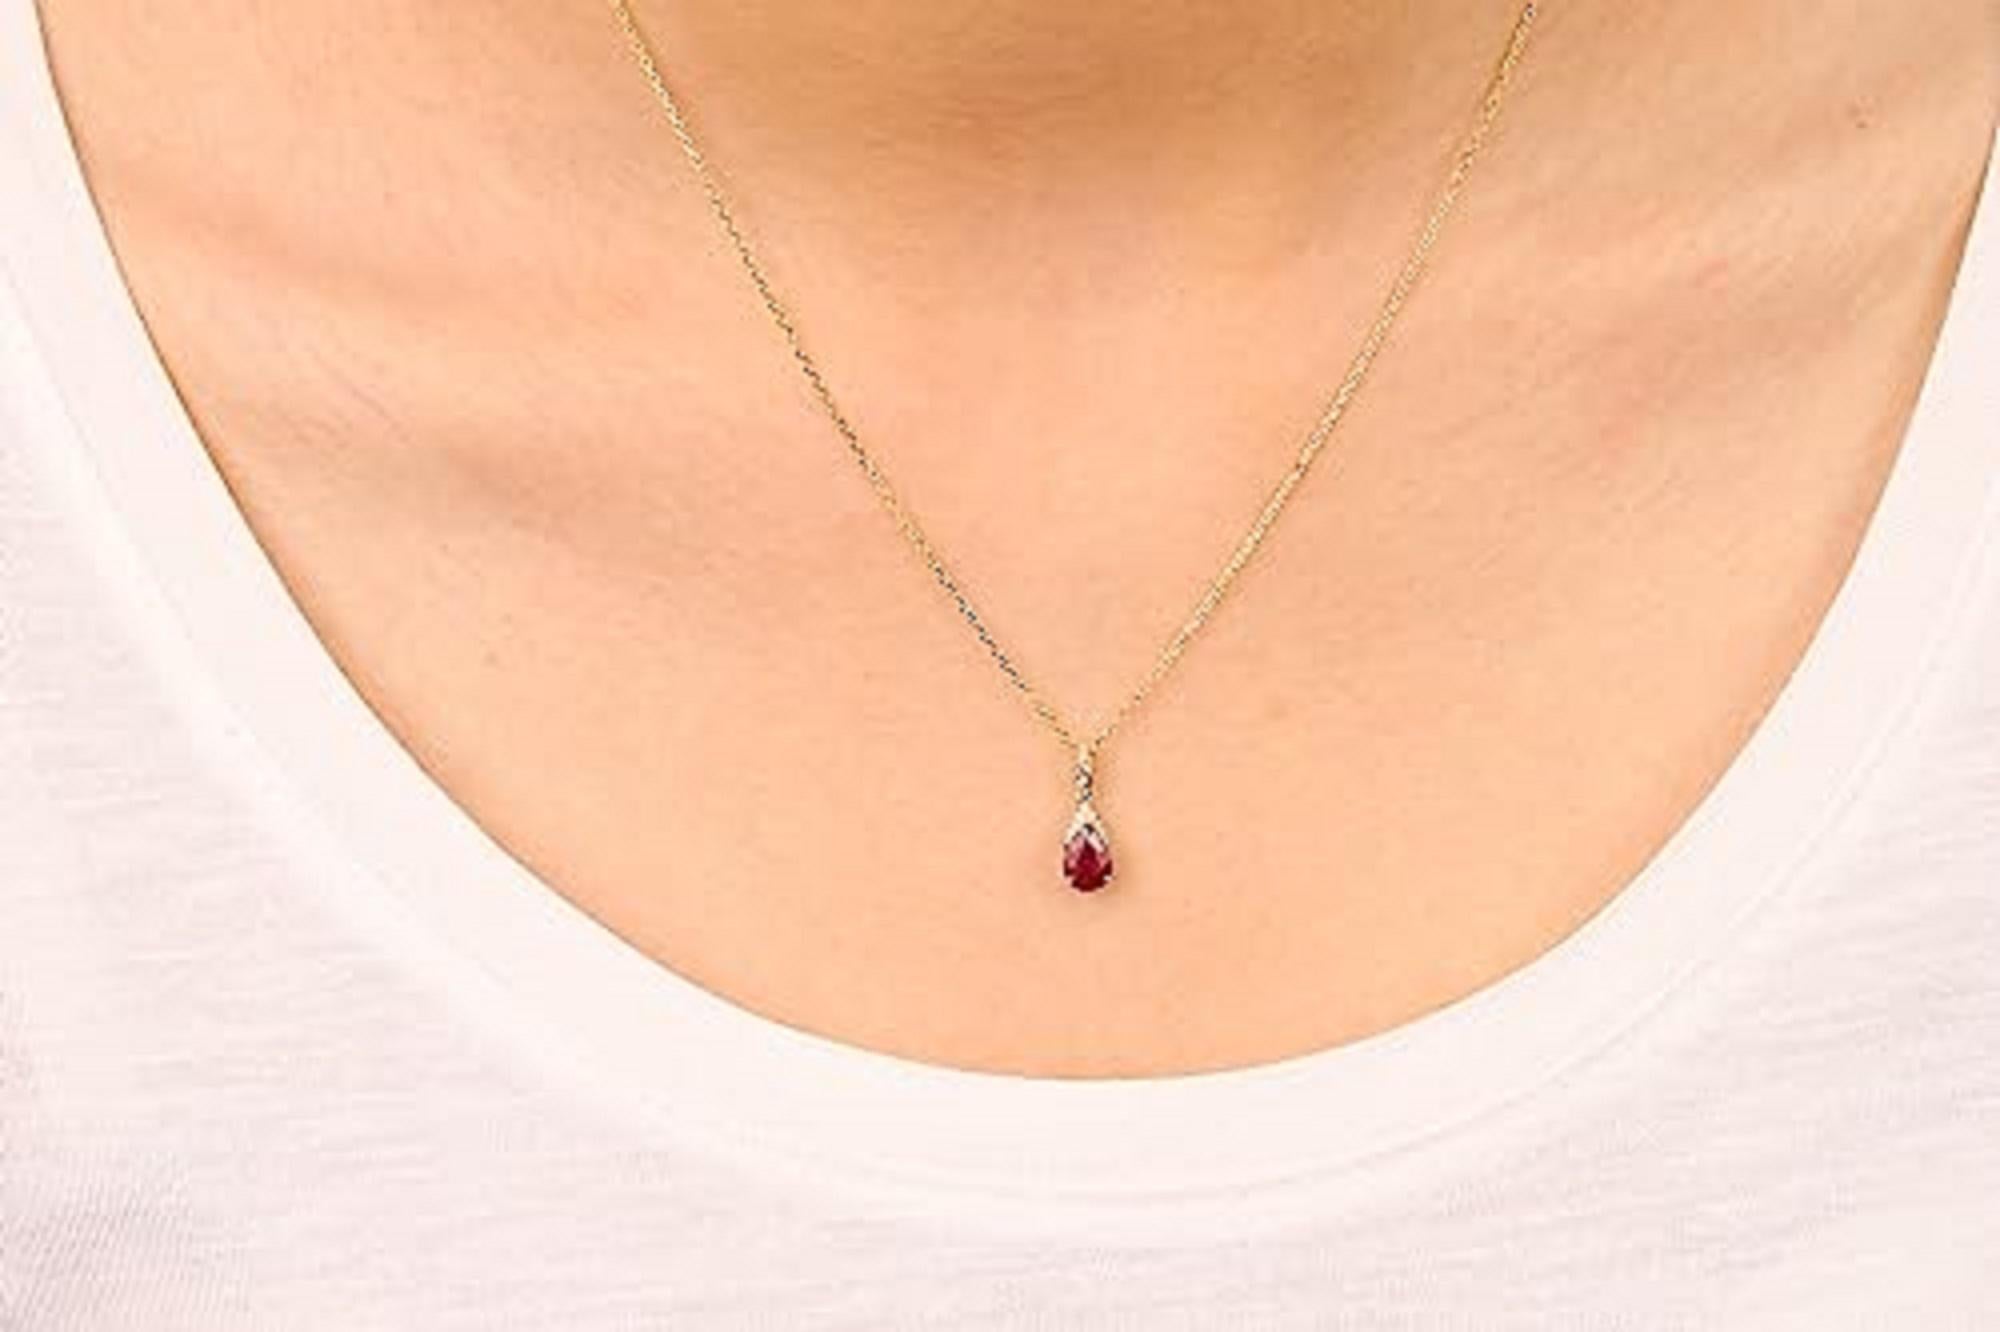 Decorate yourself in elegance with this Pendant is crafted from 10-karat Yellow Gold by Gin & Grace. This Pendant is made up of 7x5 Pear-Cut Ruby (1 pcs) 0.78 carat and Round-cut White Diamond (10 Pcs) 0.04 Carat. This Pendant is weight 1.73 grams.